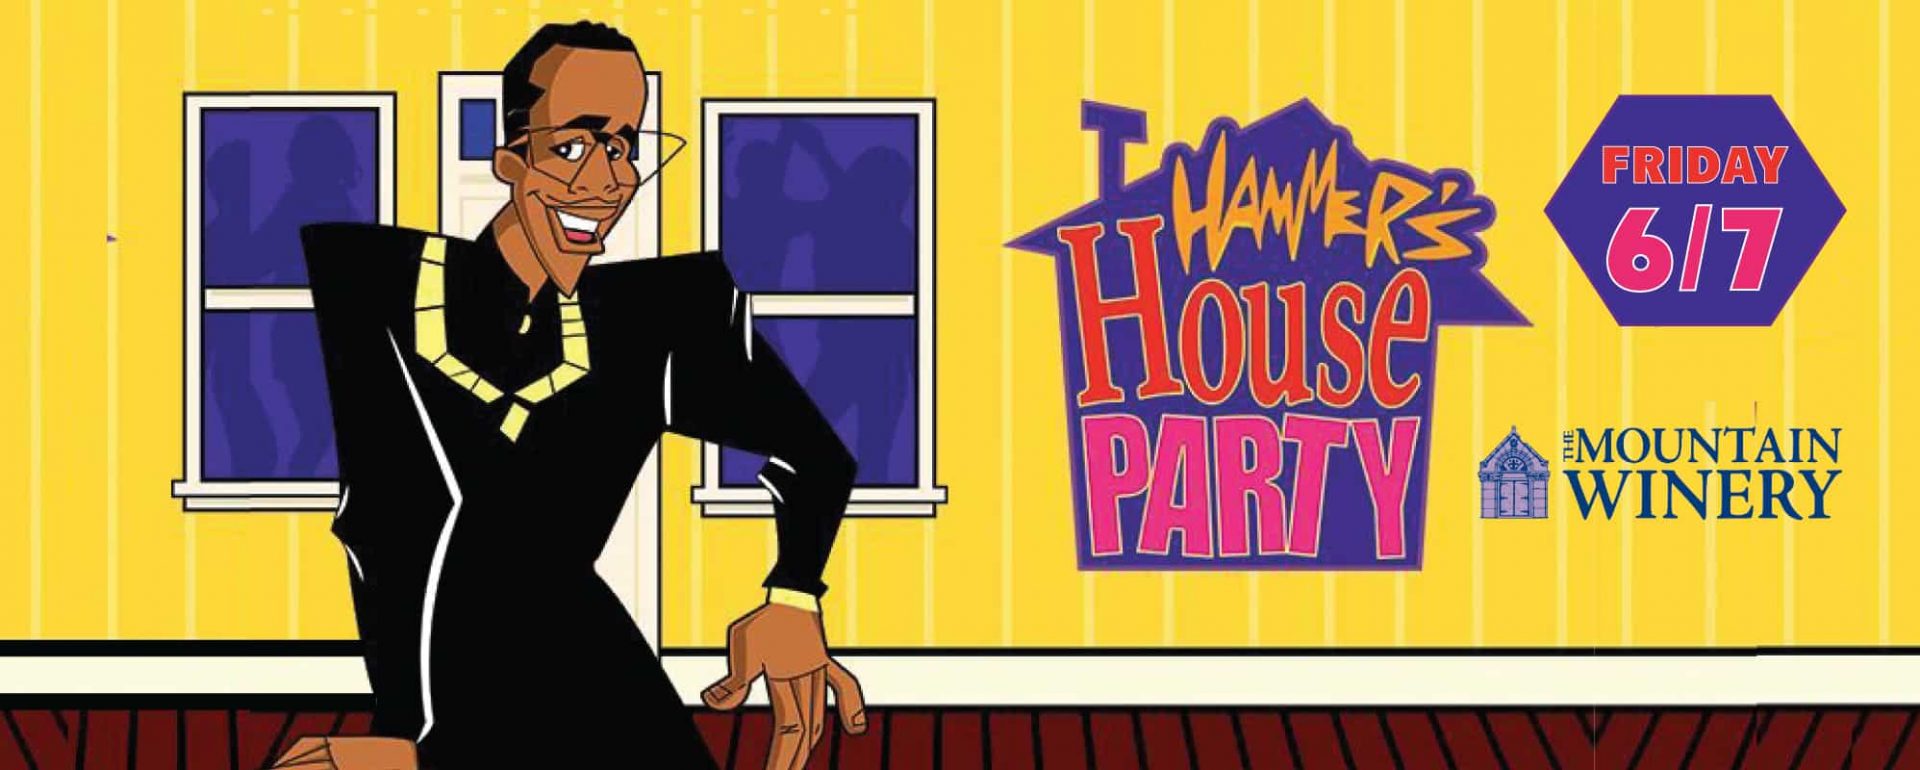 Mountain Winery Presents MC Hammer's House Party